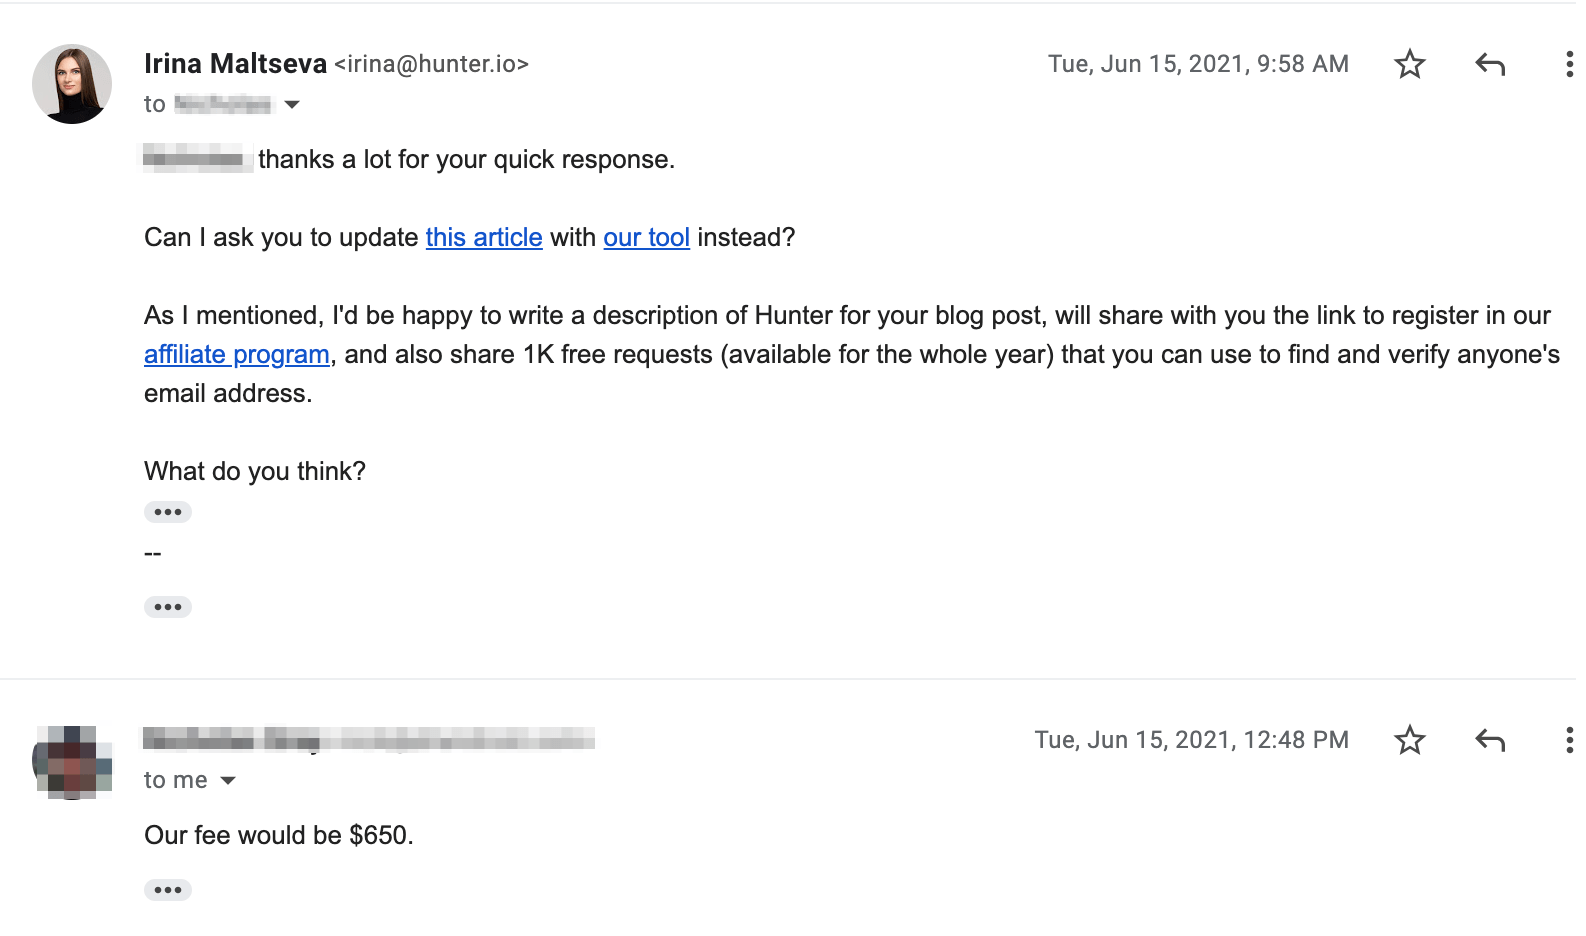 Example outreach response asking for a fee
